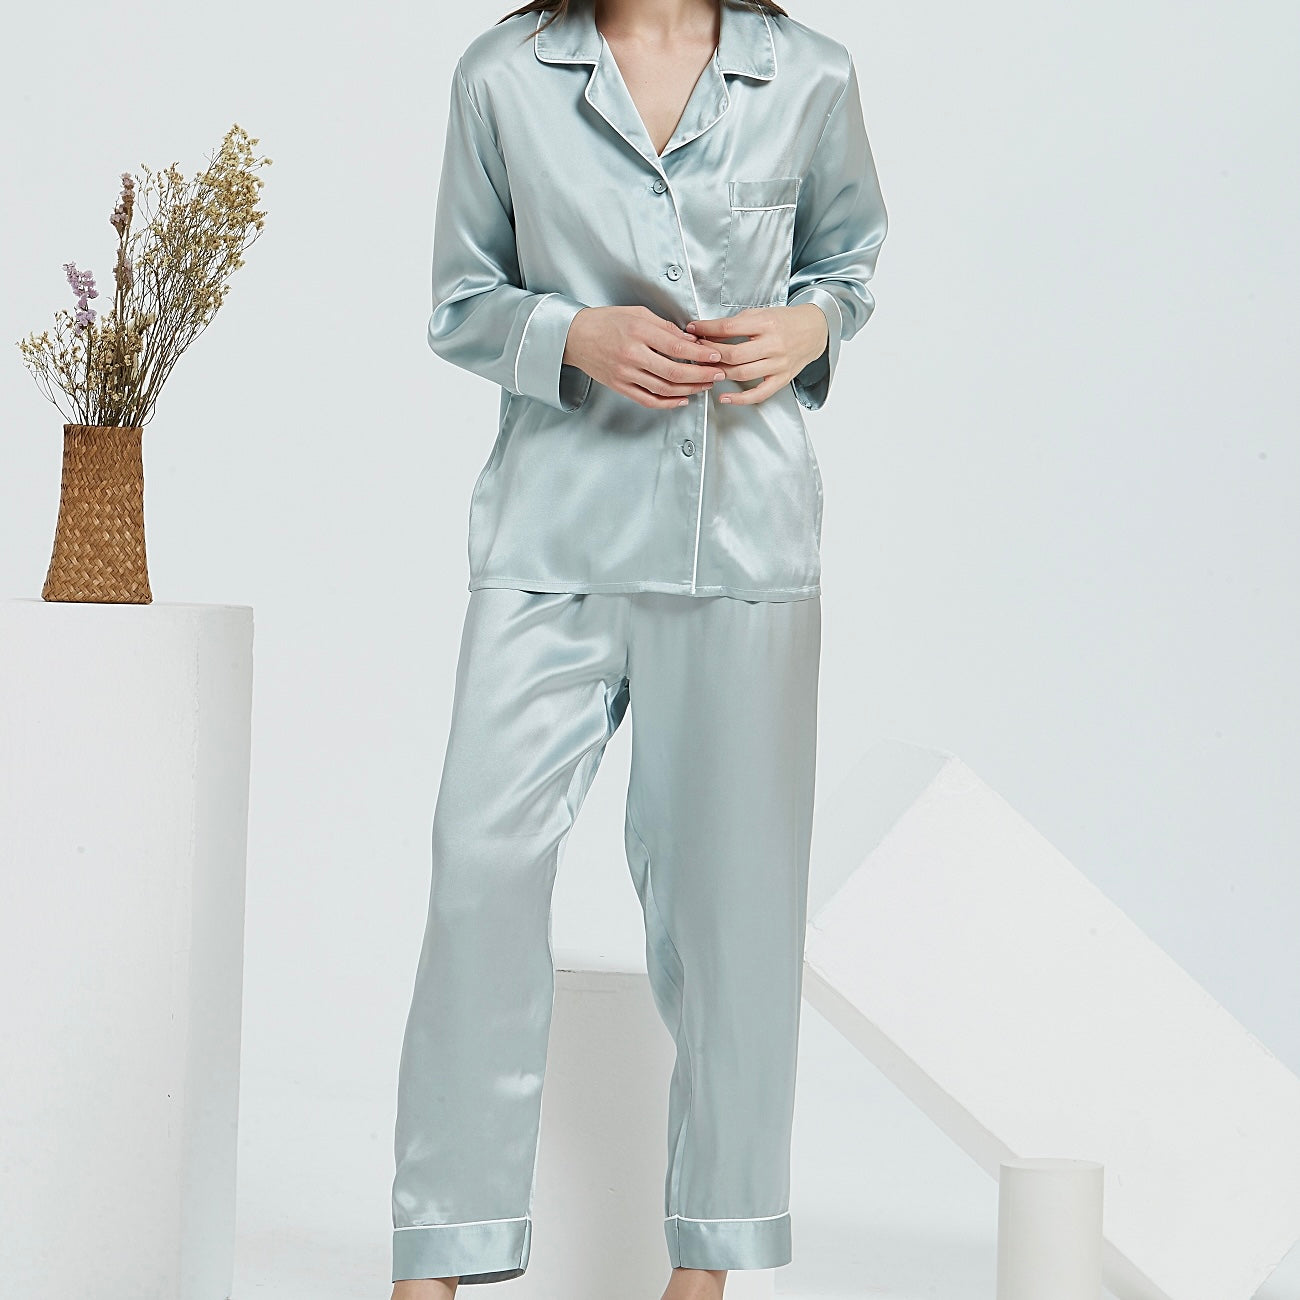 Pure Silk Long Pyjamas Set in Silver with White PipingWhite Trousseau’s Pure Mulberry Silk Long Pyjamas Set in Mint. High quality and breathable, our silk pyjamas set will make you feel stylish while lounging at home. It is the best sleepwear for Singapore weather!